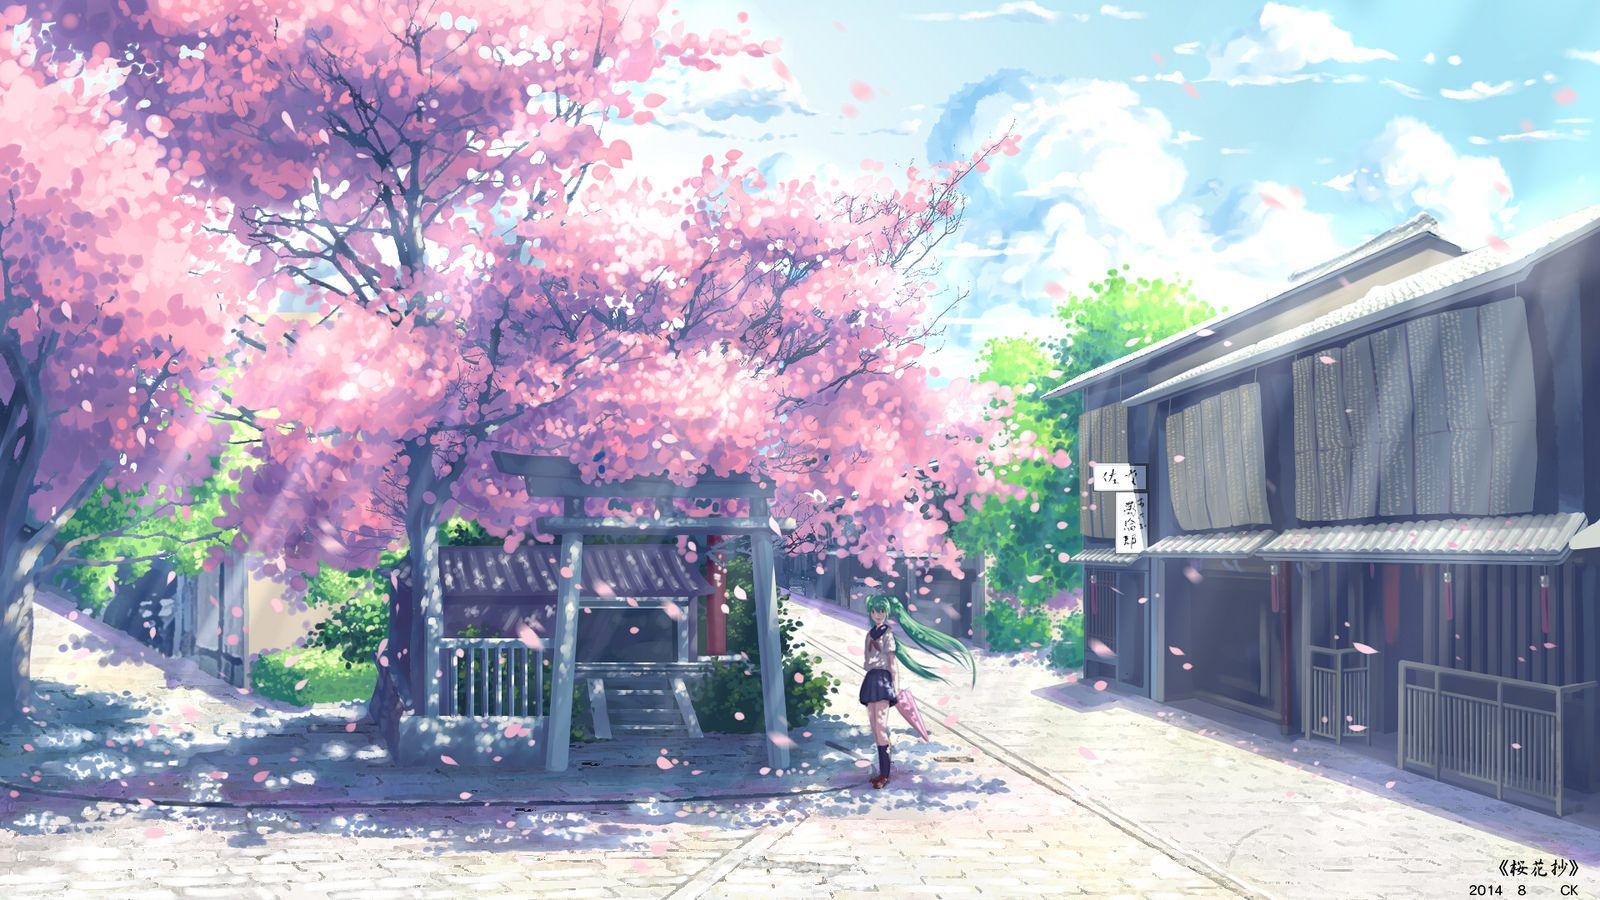 Anime Scenery Cherry Blossoms Background Hd Image 1_28214060692_o